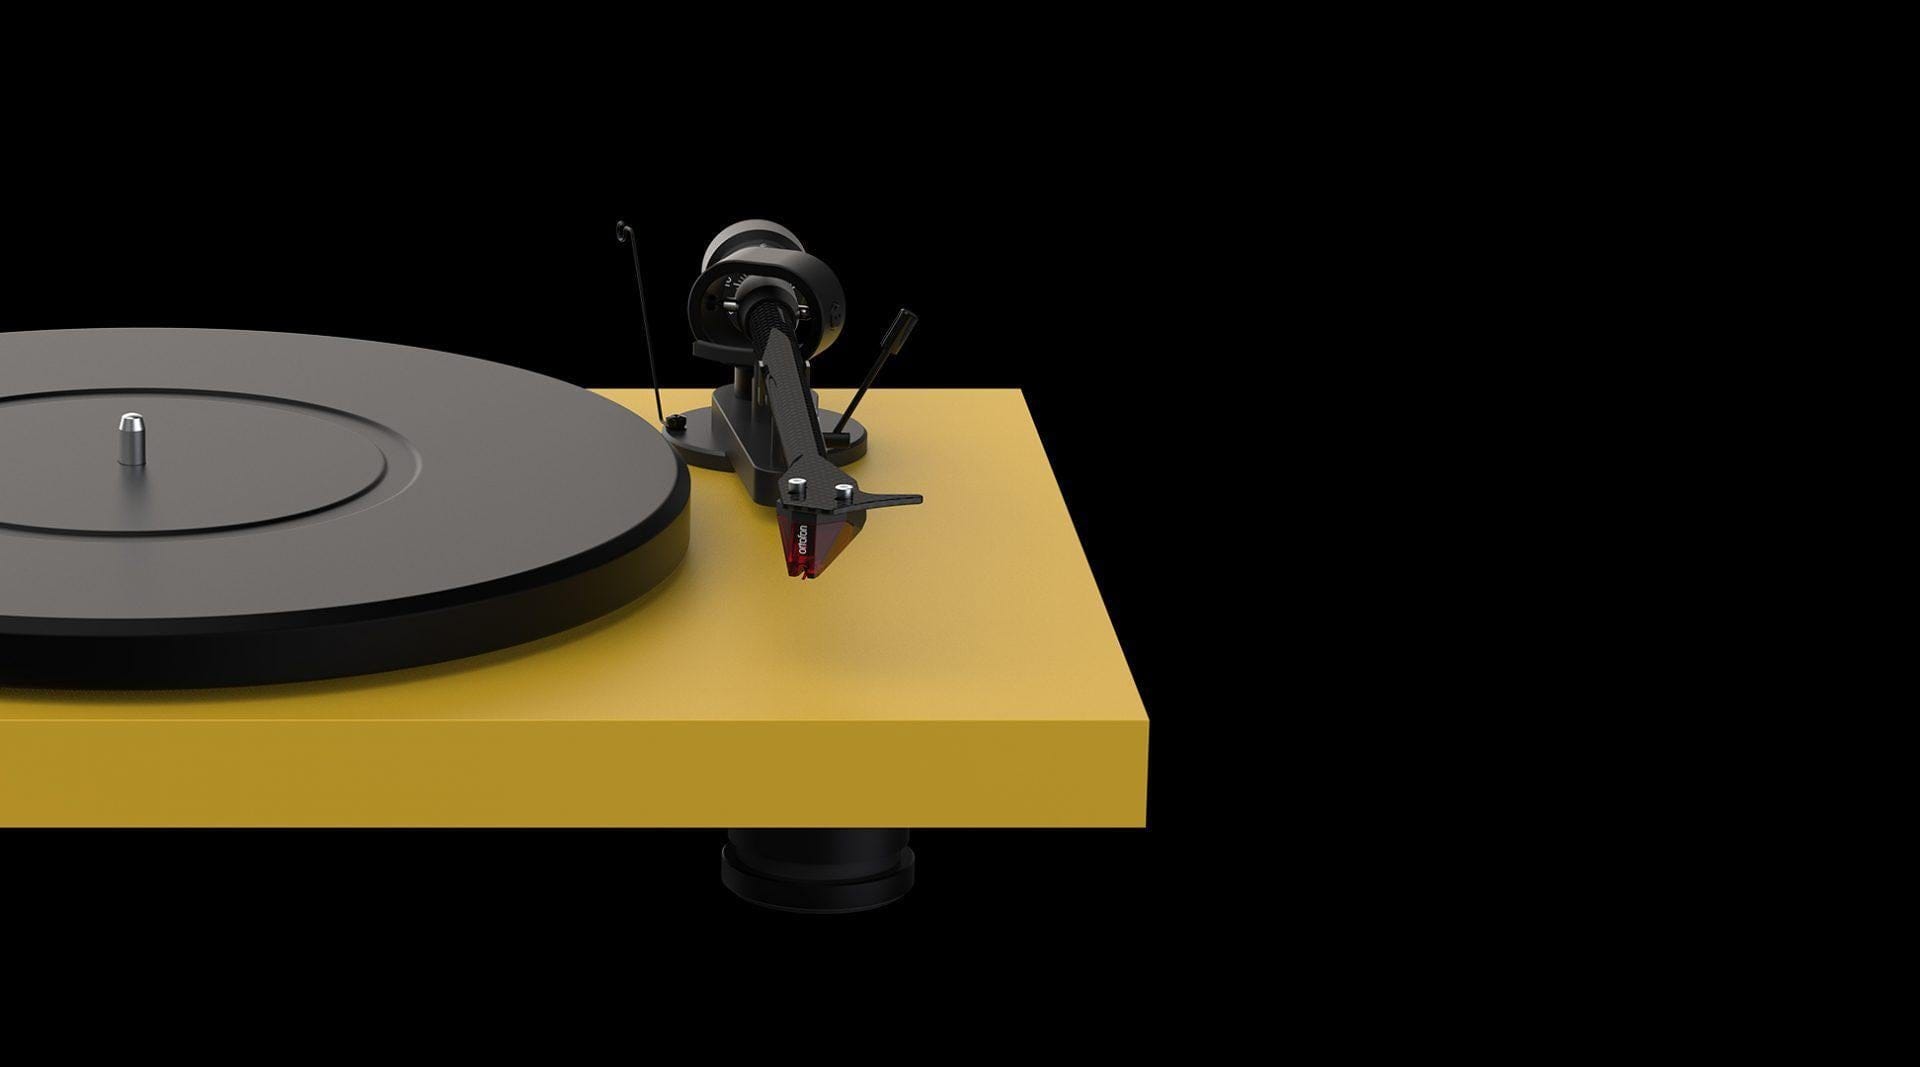 ProJect Audio Systems Turntables ProJect Debut Carbon EVO Acryl Turntable (Satin White) with Ortofon 2M Red Cartridge